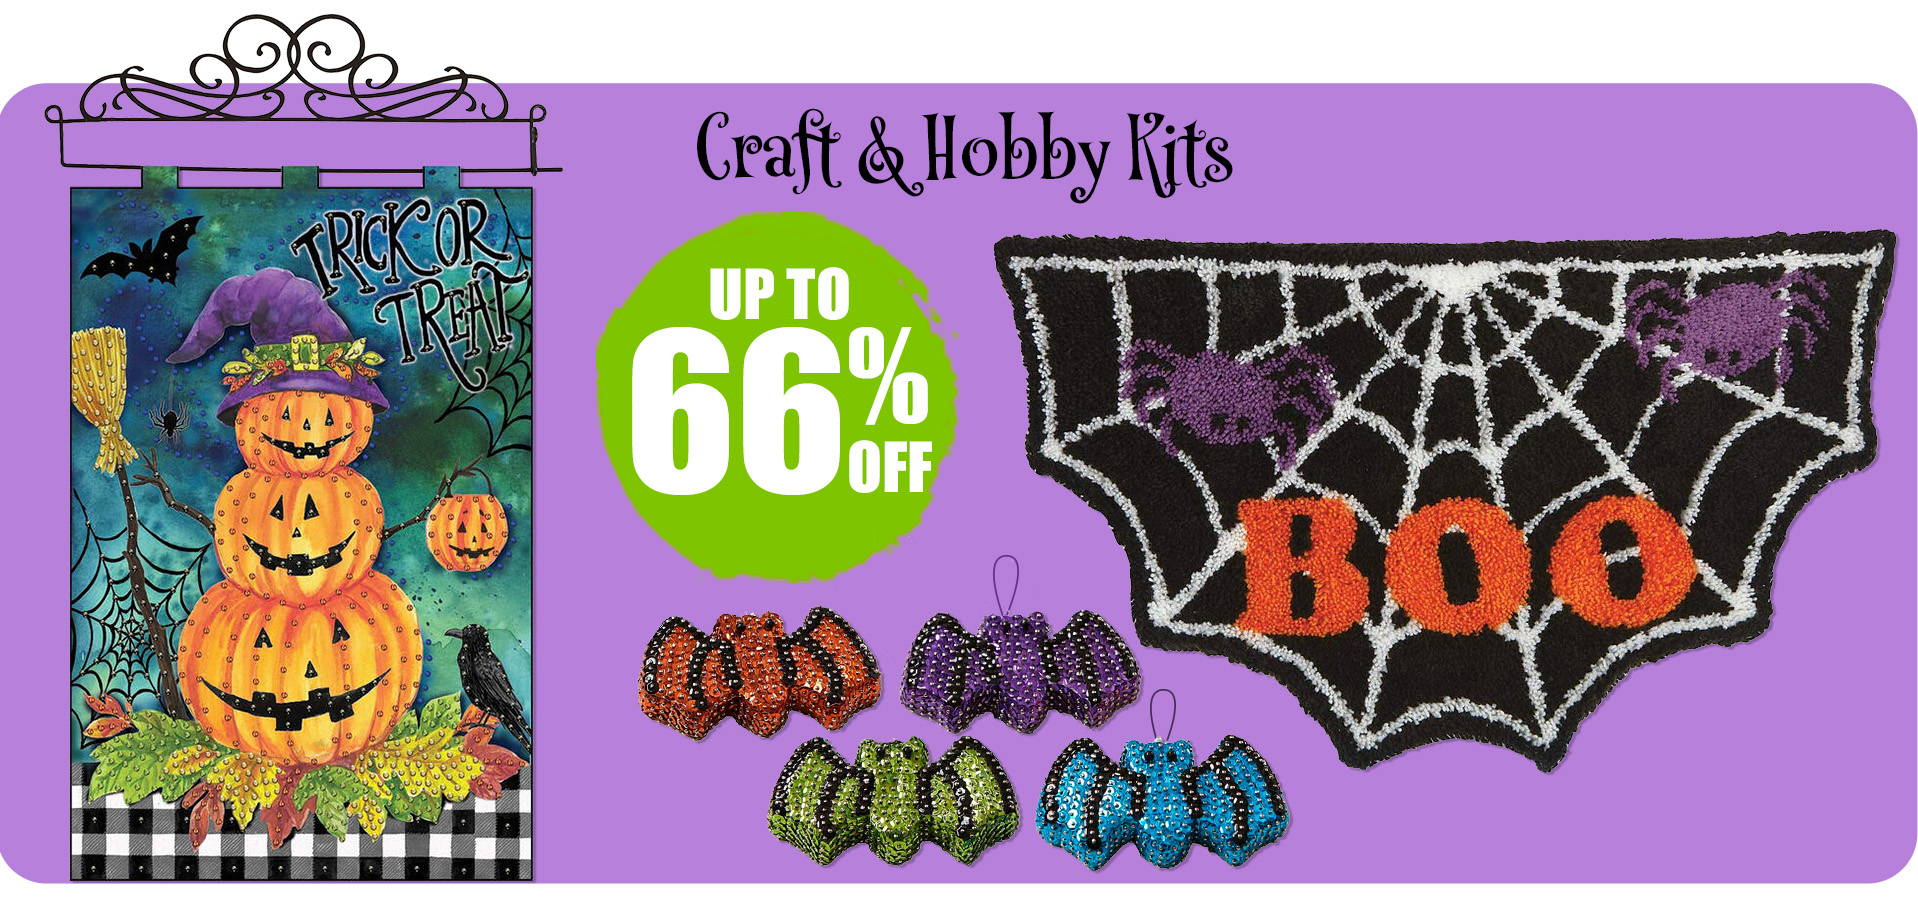 Craft & Hobby Kits up to 50% Off. Image: Featured Halloween Hobby Kits.